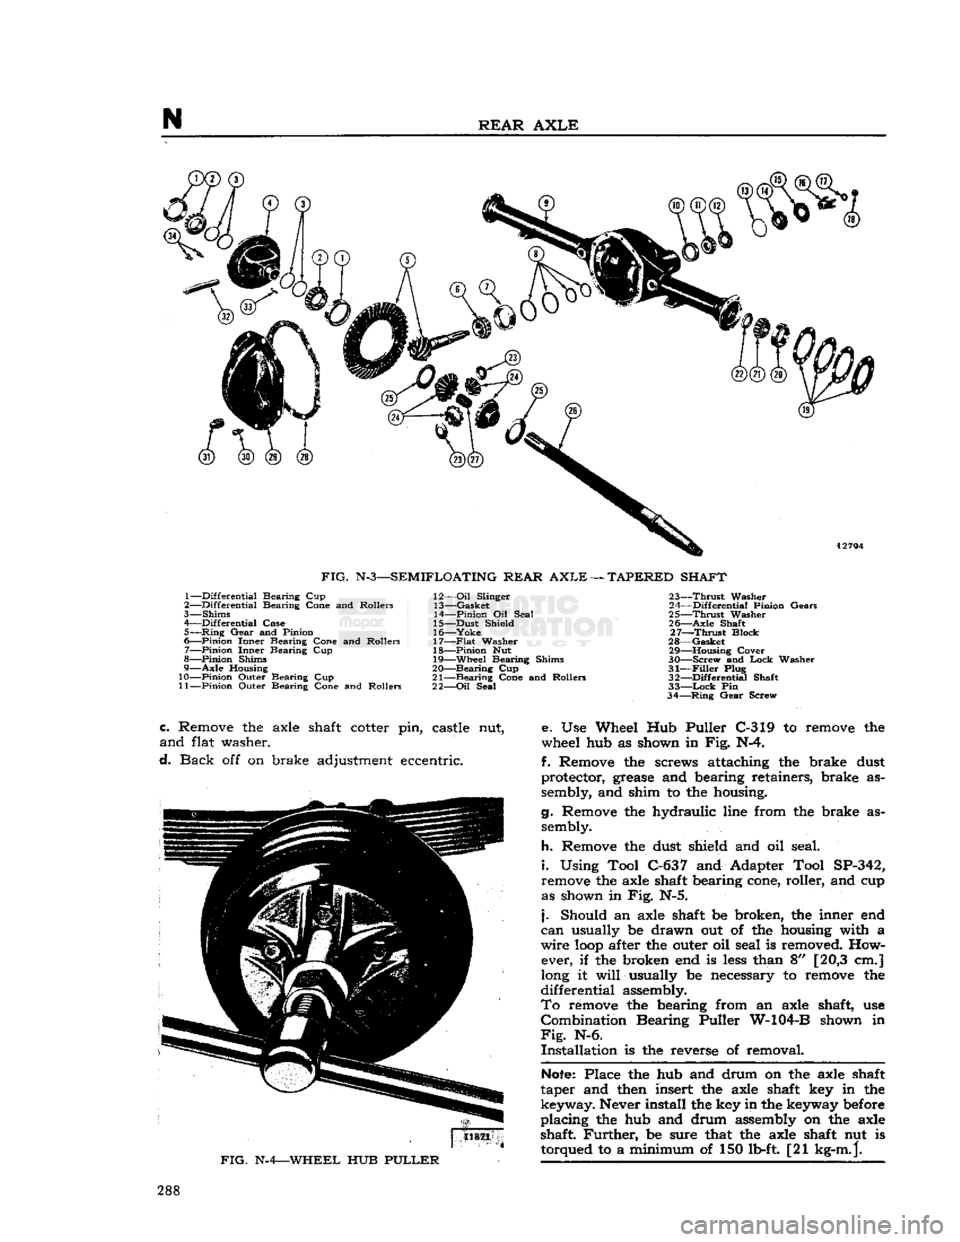 JEEP CJ 1953 User Guide 
FIG.
 N-3—SEMIFLOATING REAR
 AXLE
 —
 TAPERED SHAFT 

1— Differential Bearing Cup 
2— Differential Bearing Cone and Rollers 
3— Shims 
4— Differential Case  5—
 Ring
 Gear and Pinion 
6